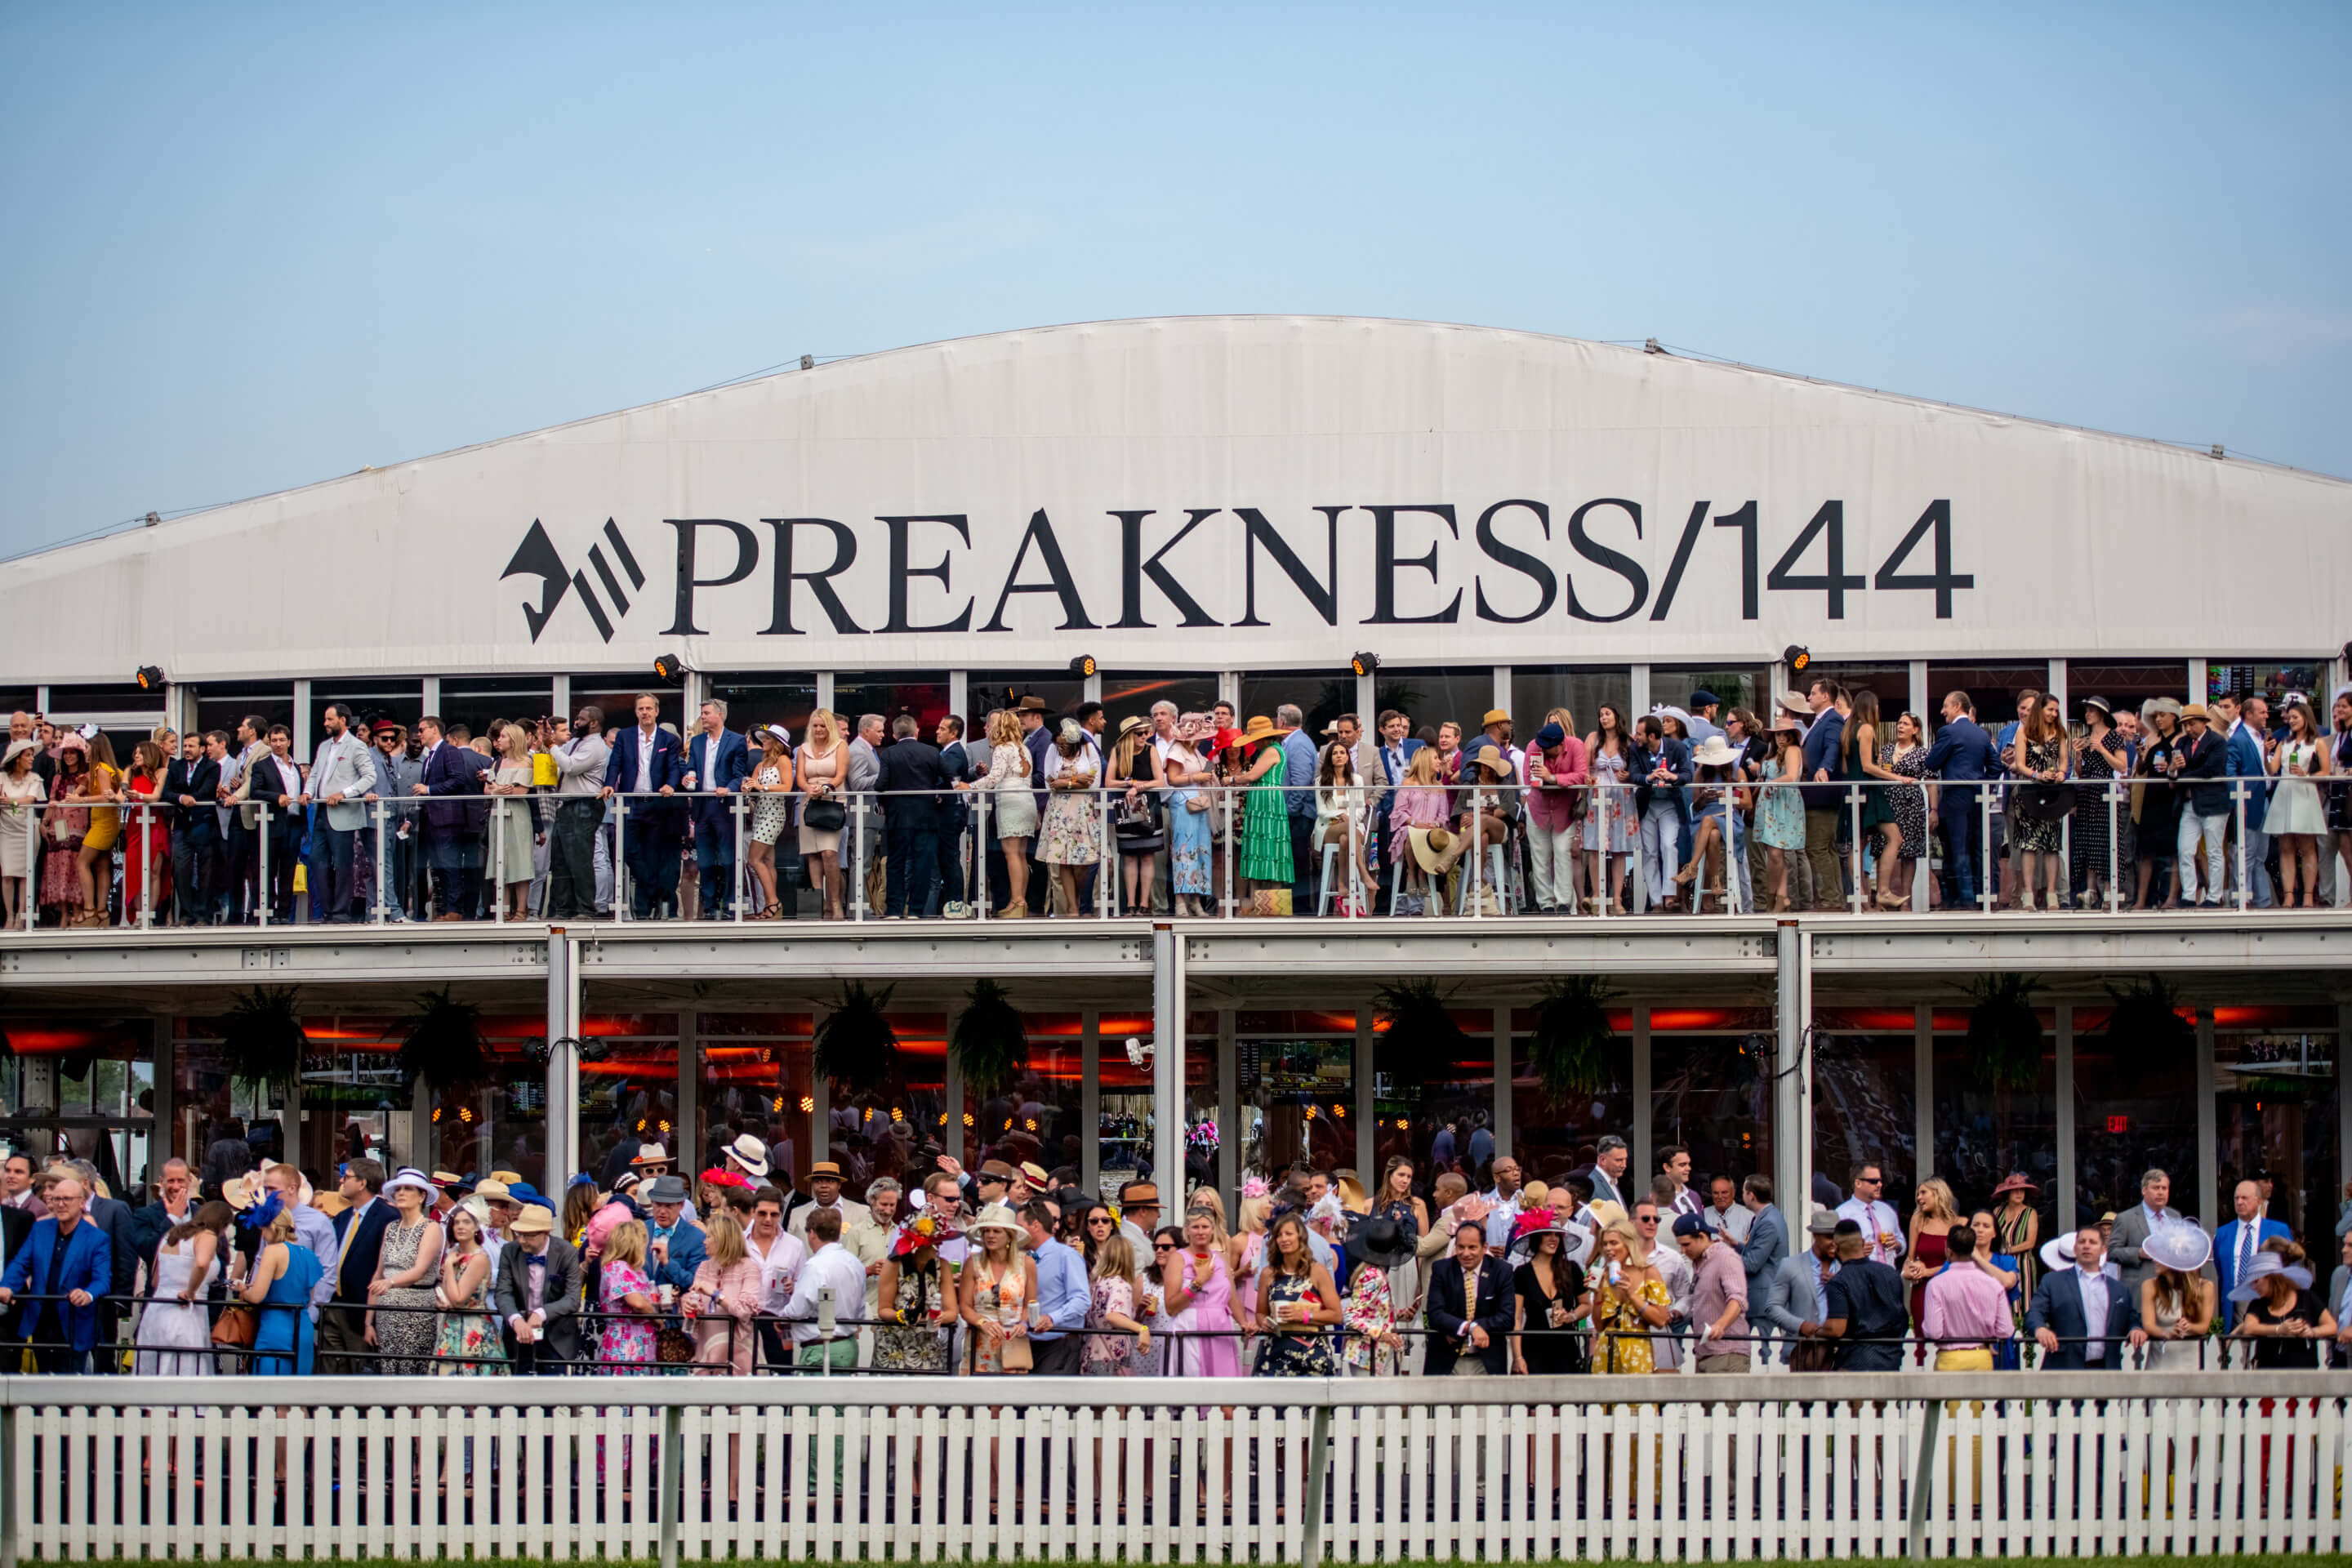 a large section of stands packed with people and a preakness 144 sign above